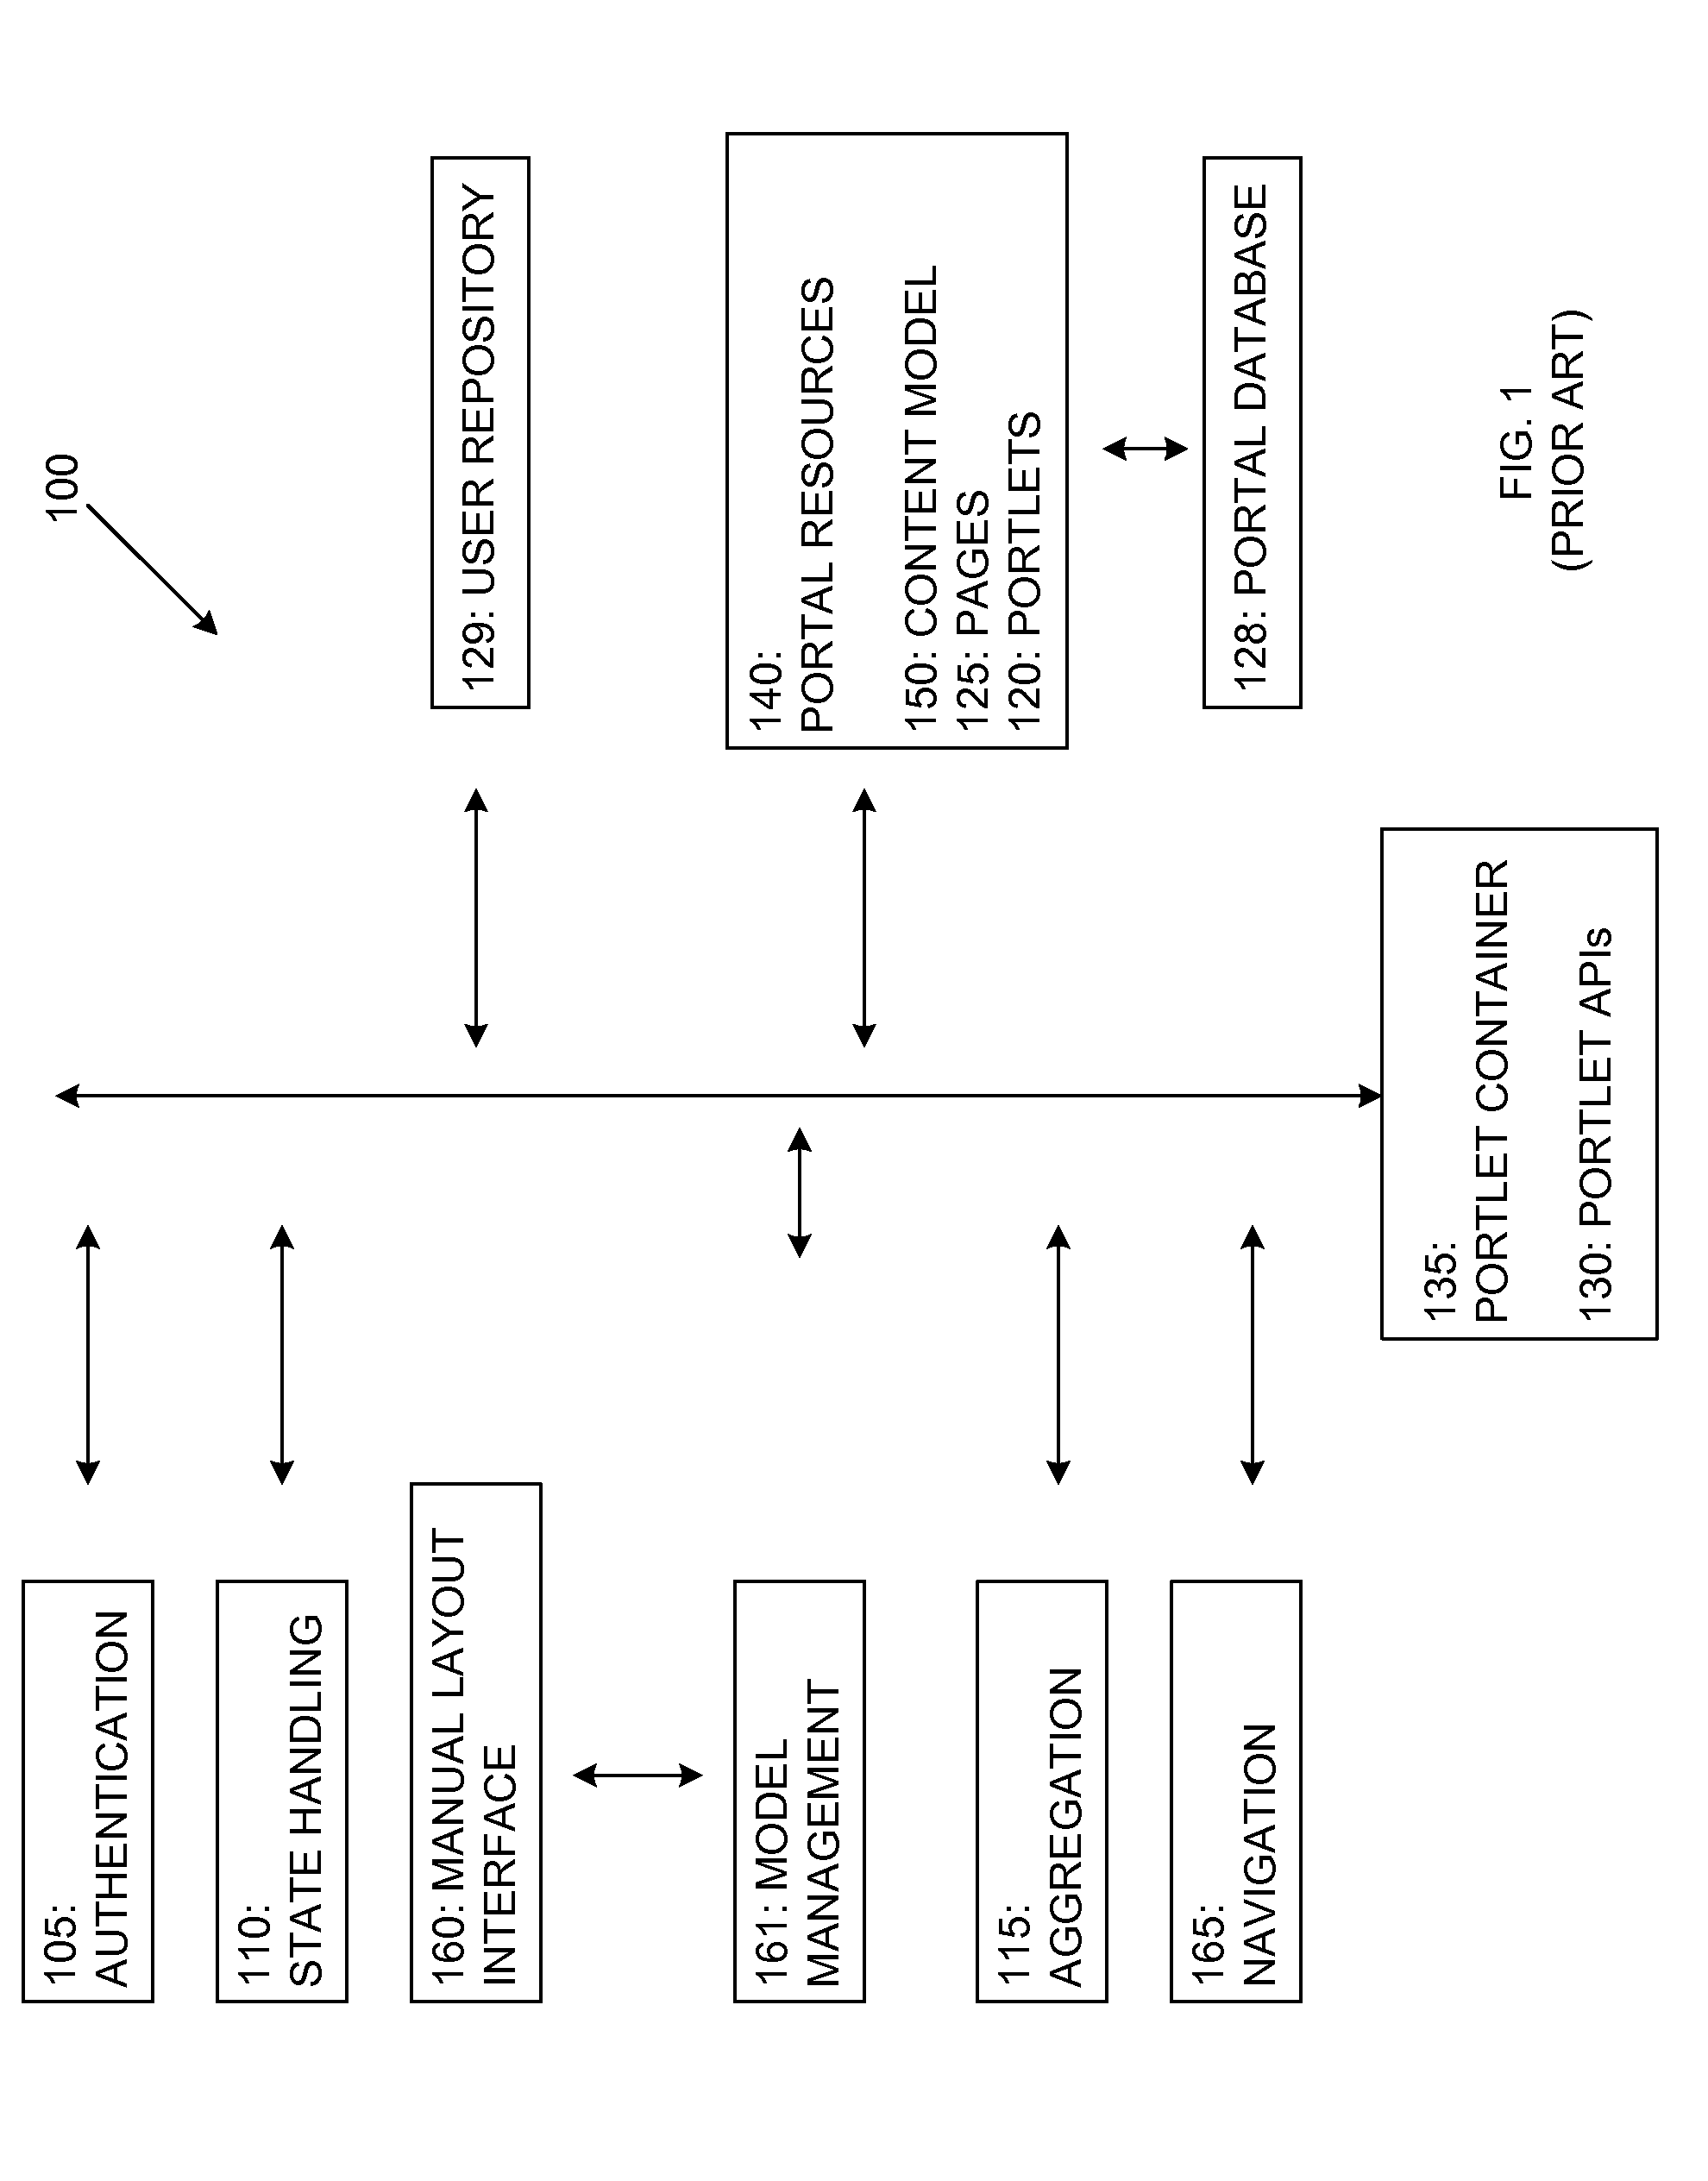 Method for Automatically Constructing Pageflows by Analysing Traversed Breadcrumbs